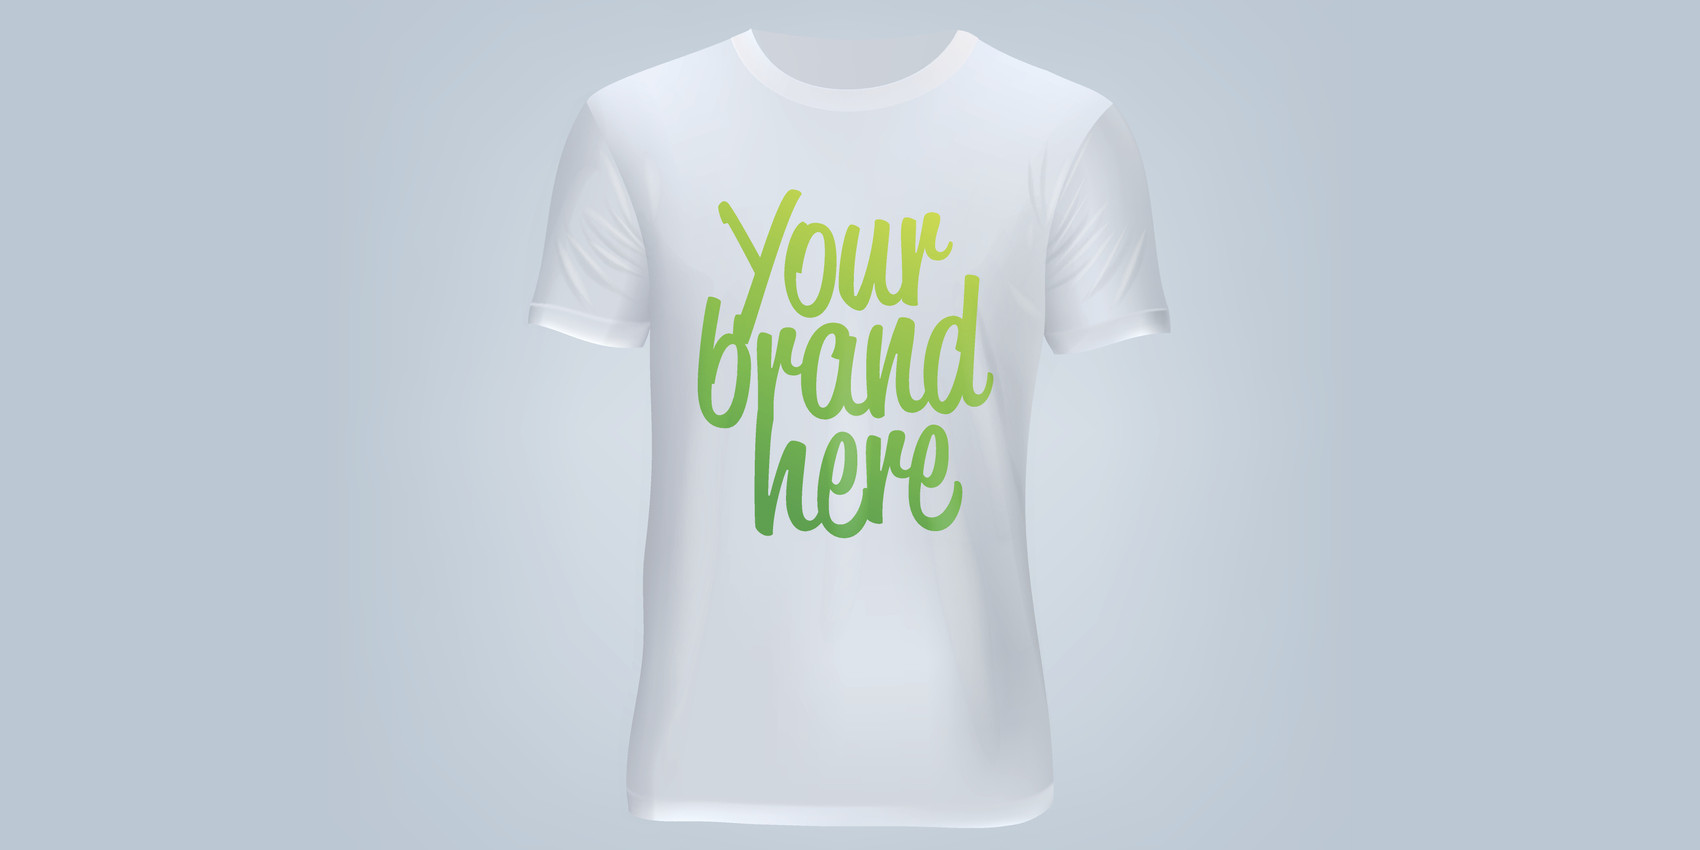 tshirt with your brand here on it